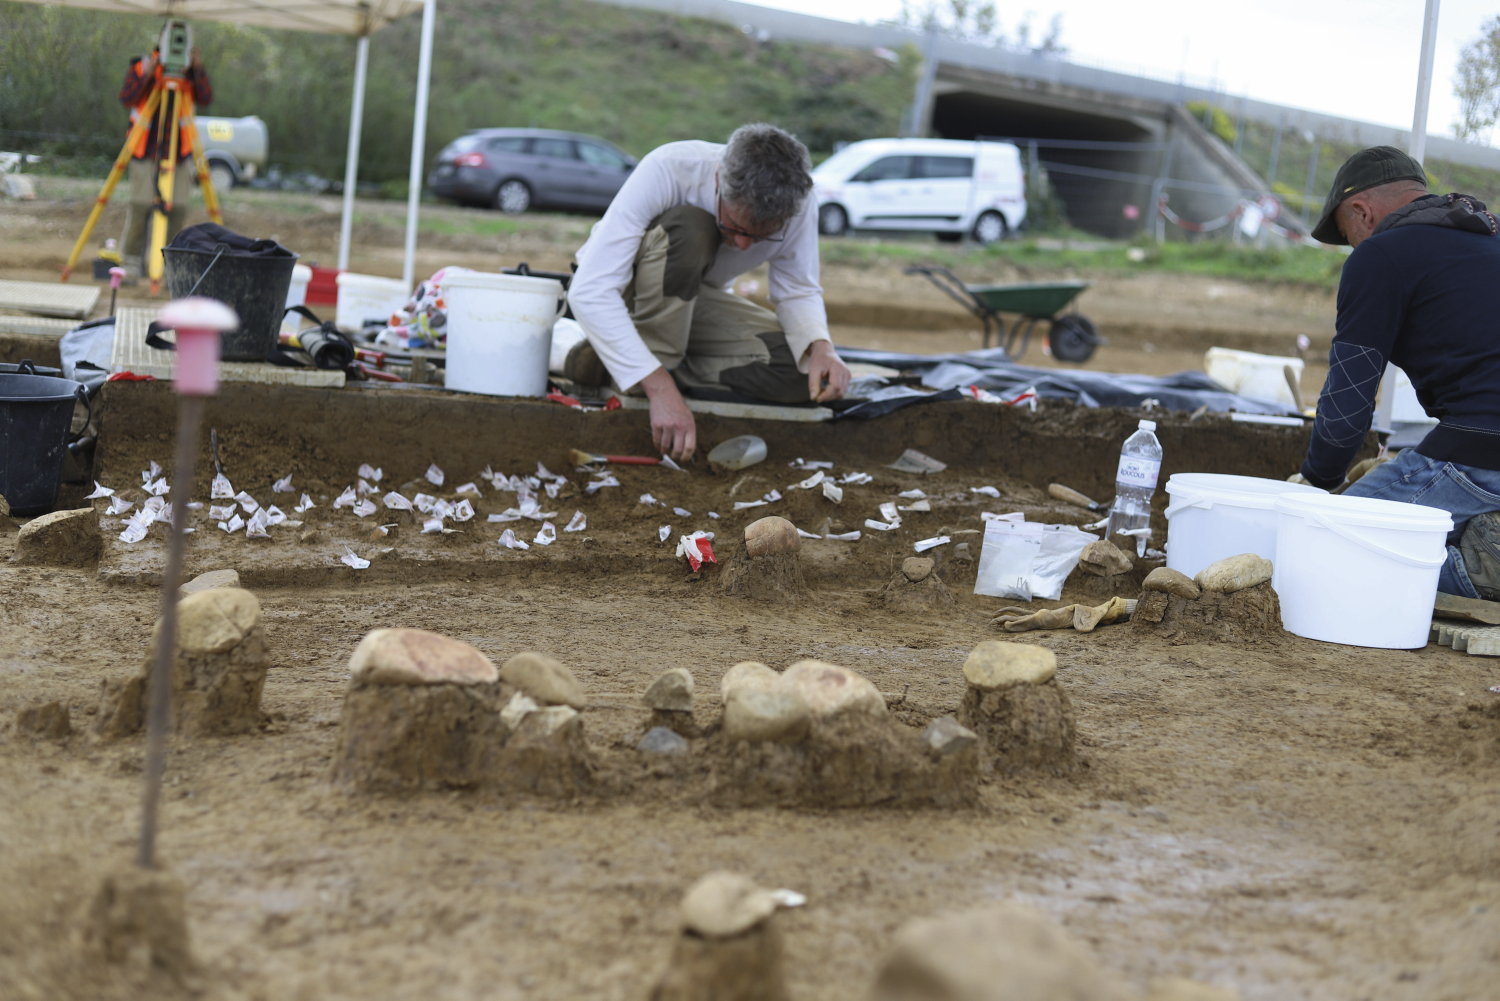 Archaeology: under the A6 motorway, a 24,000-year-old camp